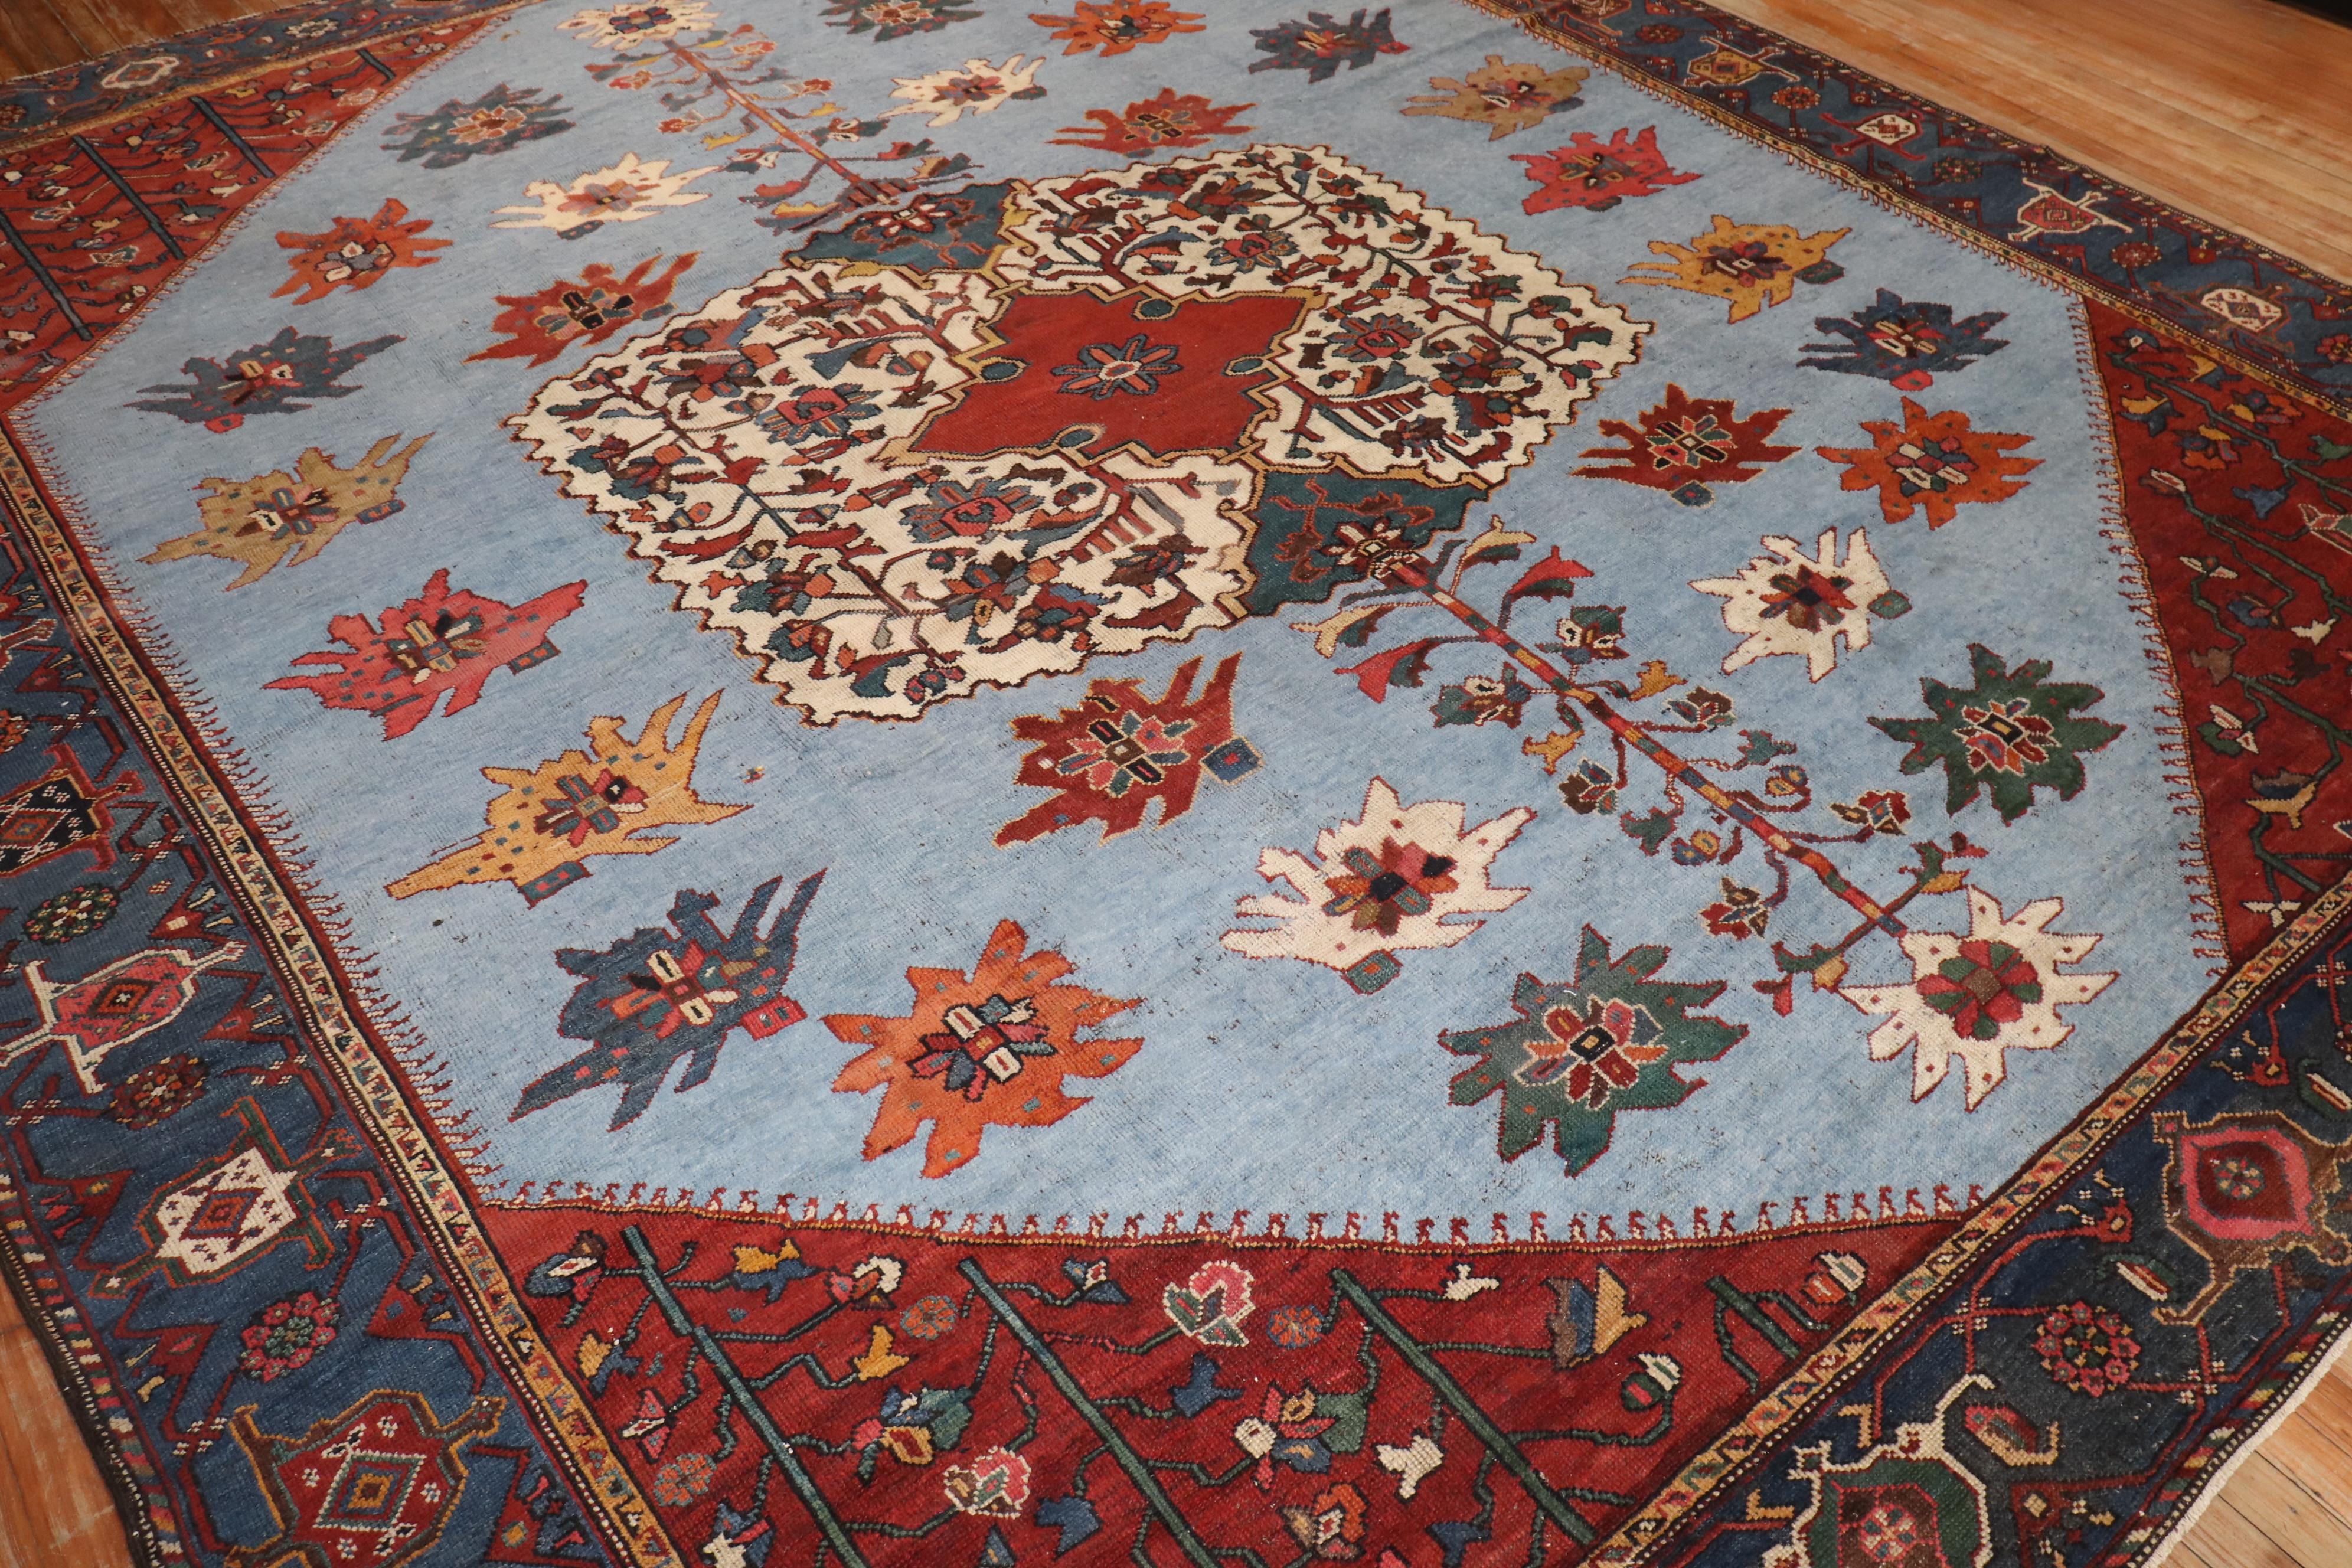 early 20th Century bold and colorful Persian bakhtiari square rug

Details
rug no.	j3160
size	10' 9